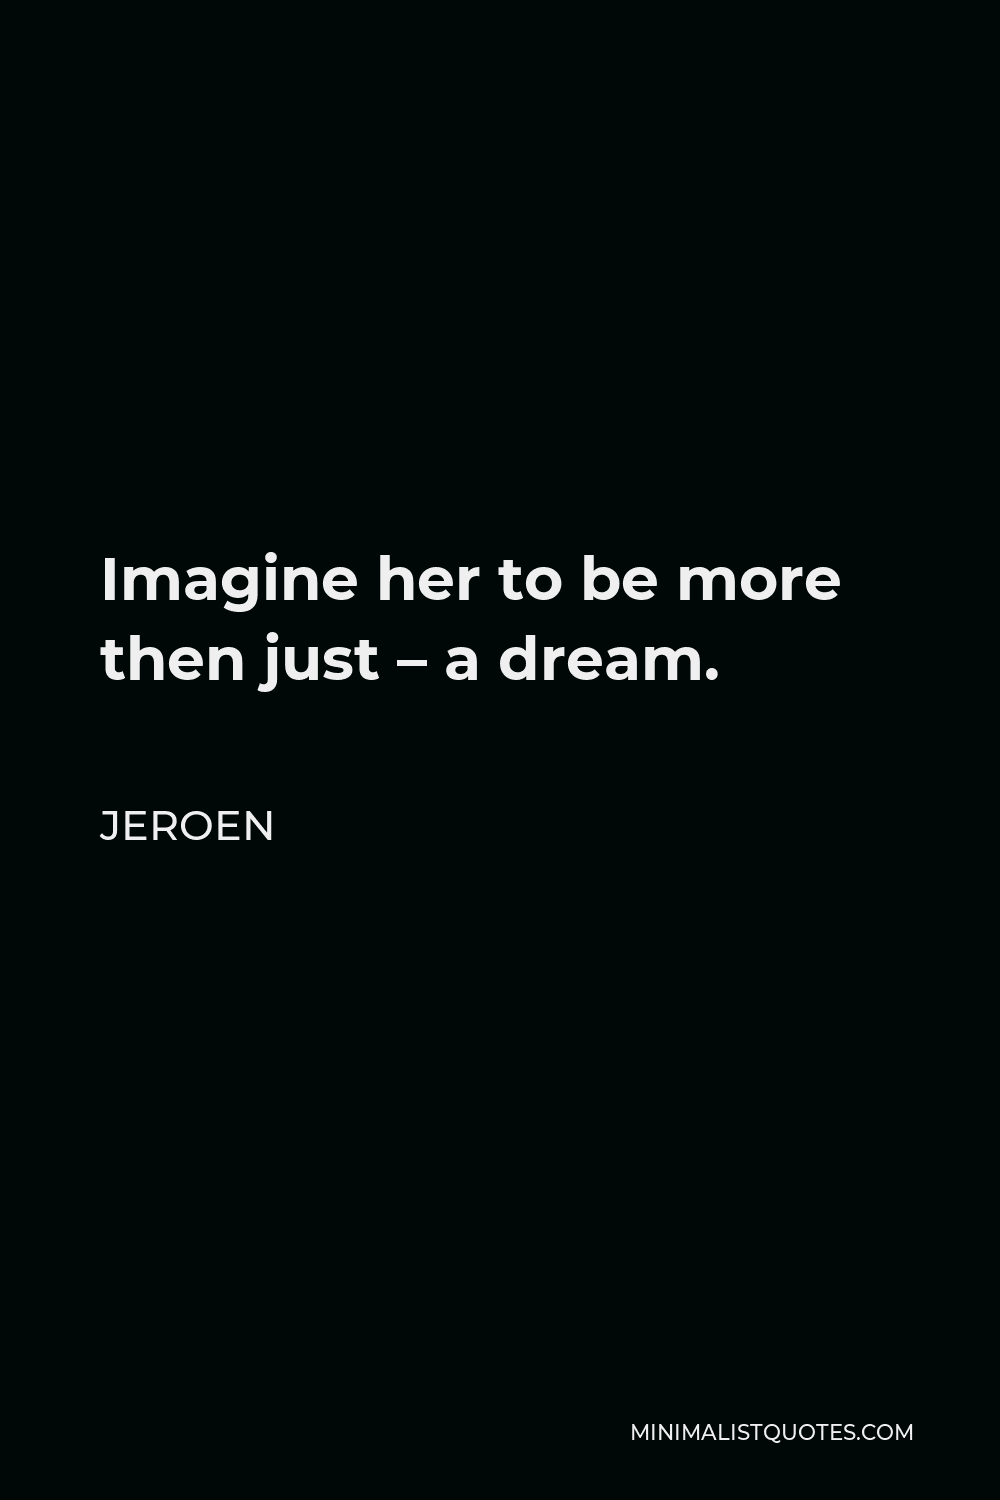 Jeroen Quote - Imagine her to be more then just – a dream.